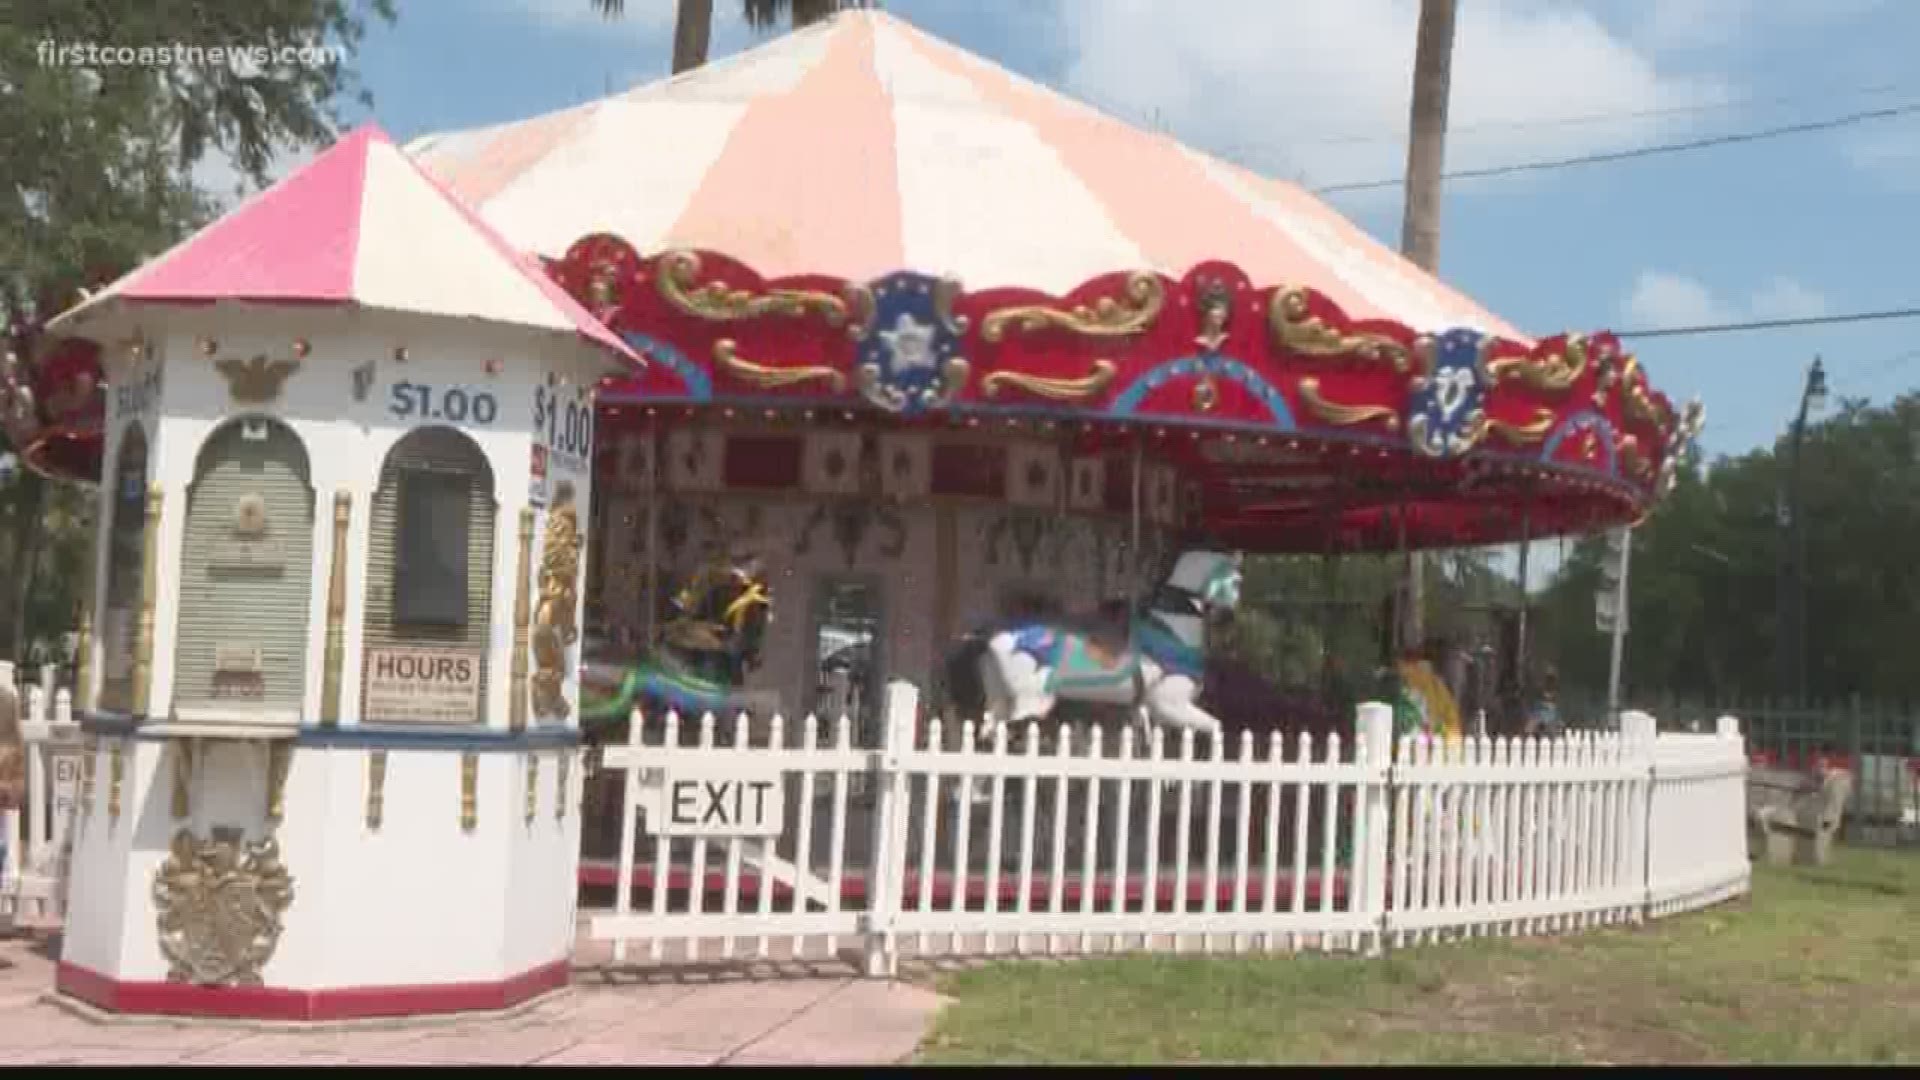 Jim Soule’s wife, Peggy, says it was her husband's wish to move the carousel “back home” to Port Charlotte when he died.